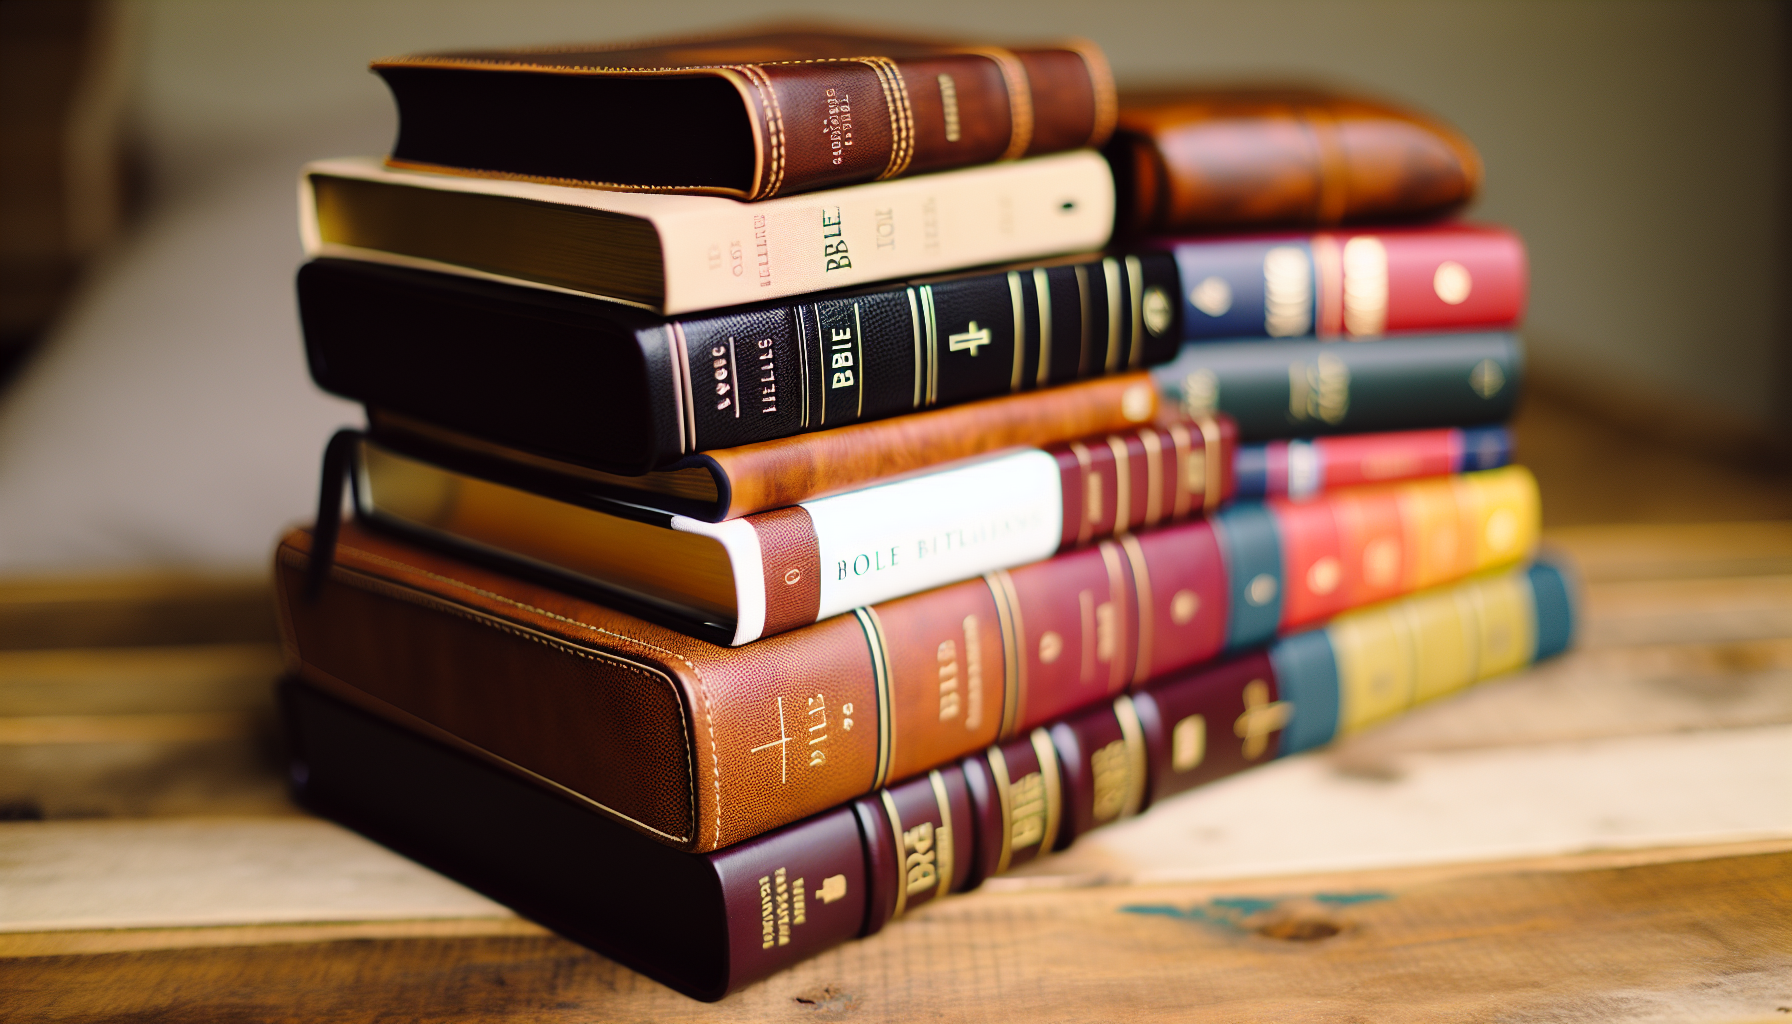 A stack of various Bible translations with different covers